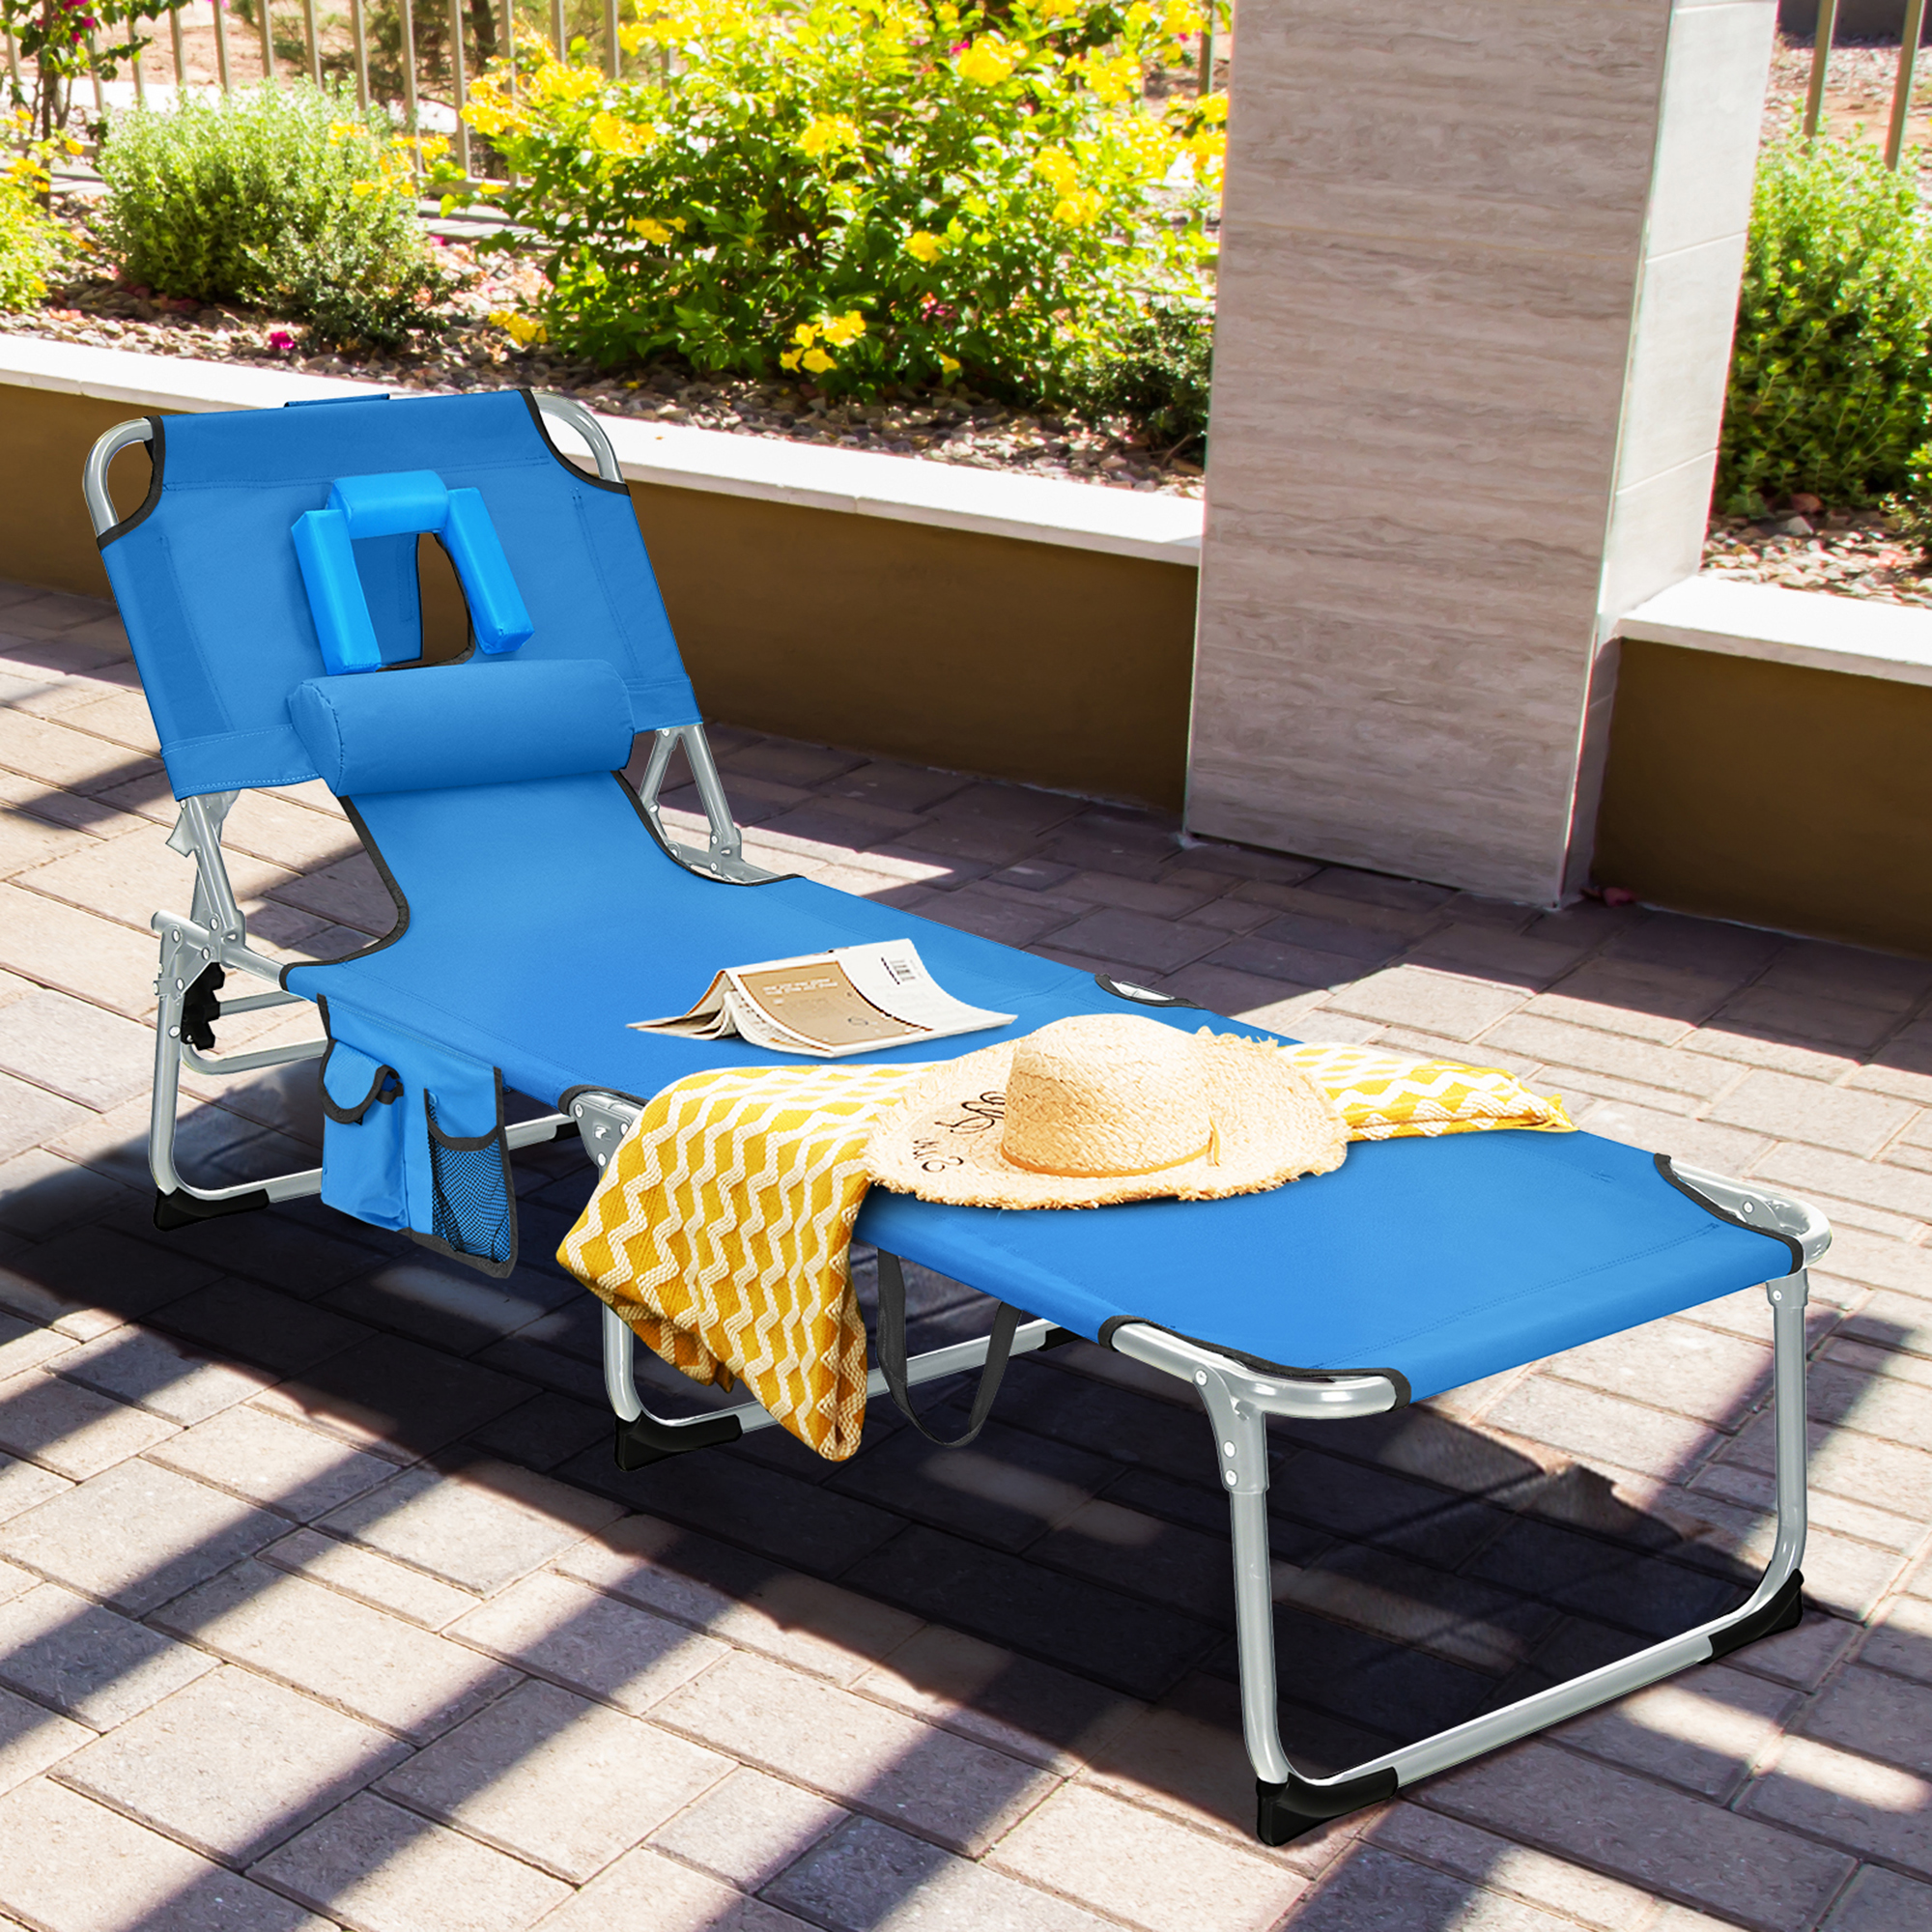 Gymax Portable Beach Chaise Lounge Chair Folding Reclining Chair w/ Facing Hole Blue - image 1 of 10